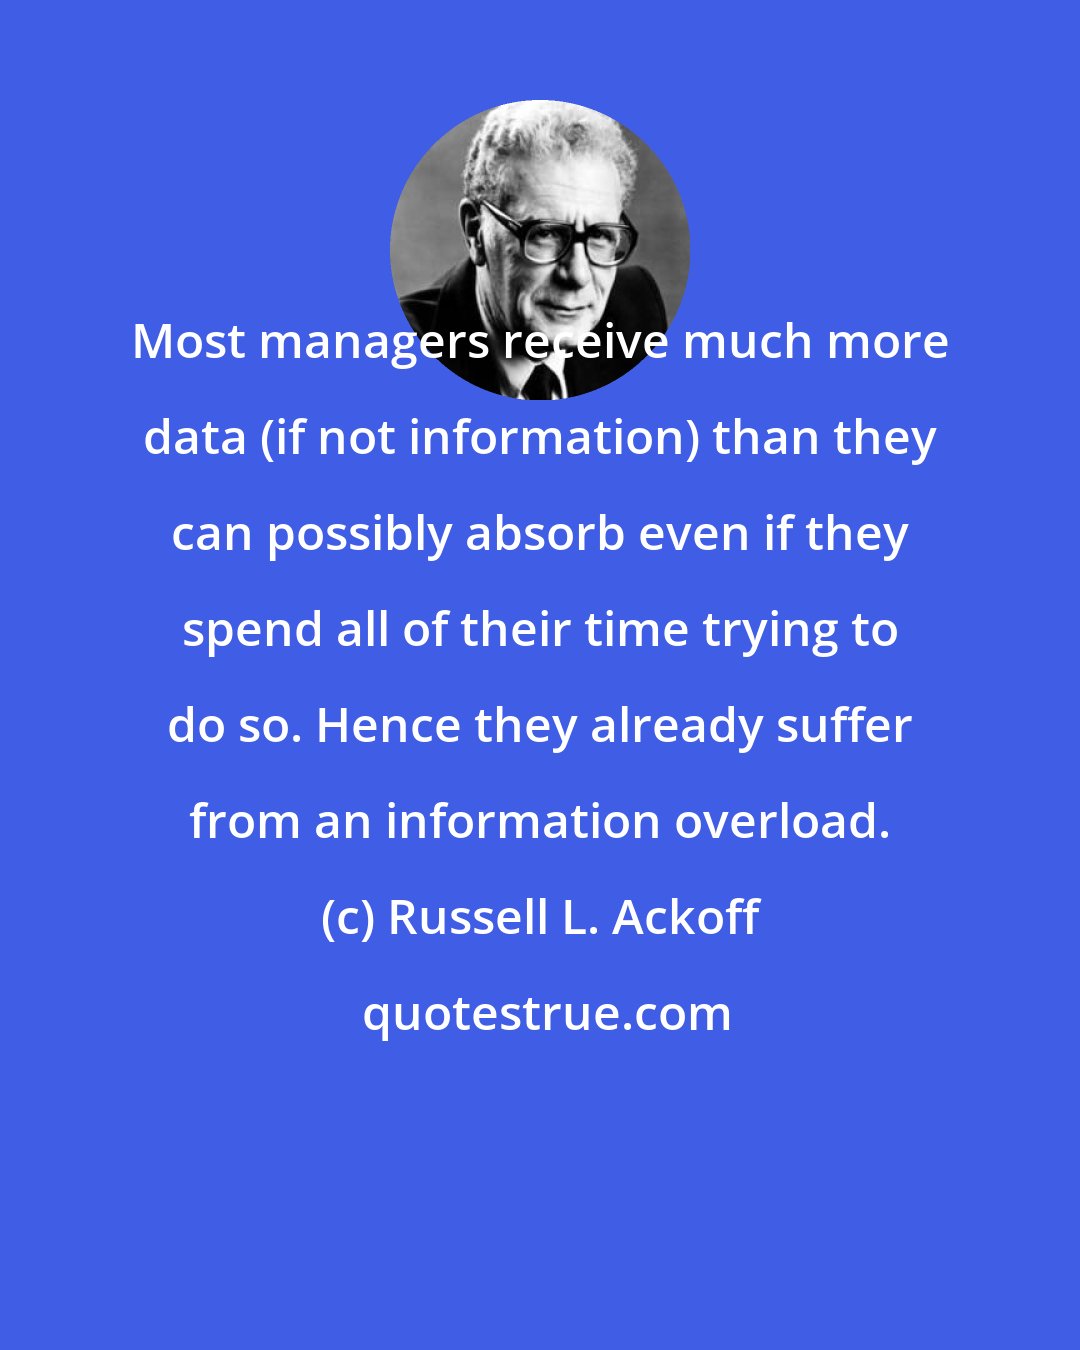 Russell L. Ackoff: Most managers receive much more data (if not information) than they can possibly absorb even if they spend all of their time trying to do so. Hence they already suffer from an information overload.